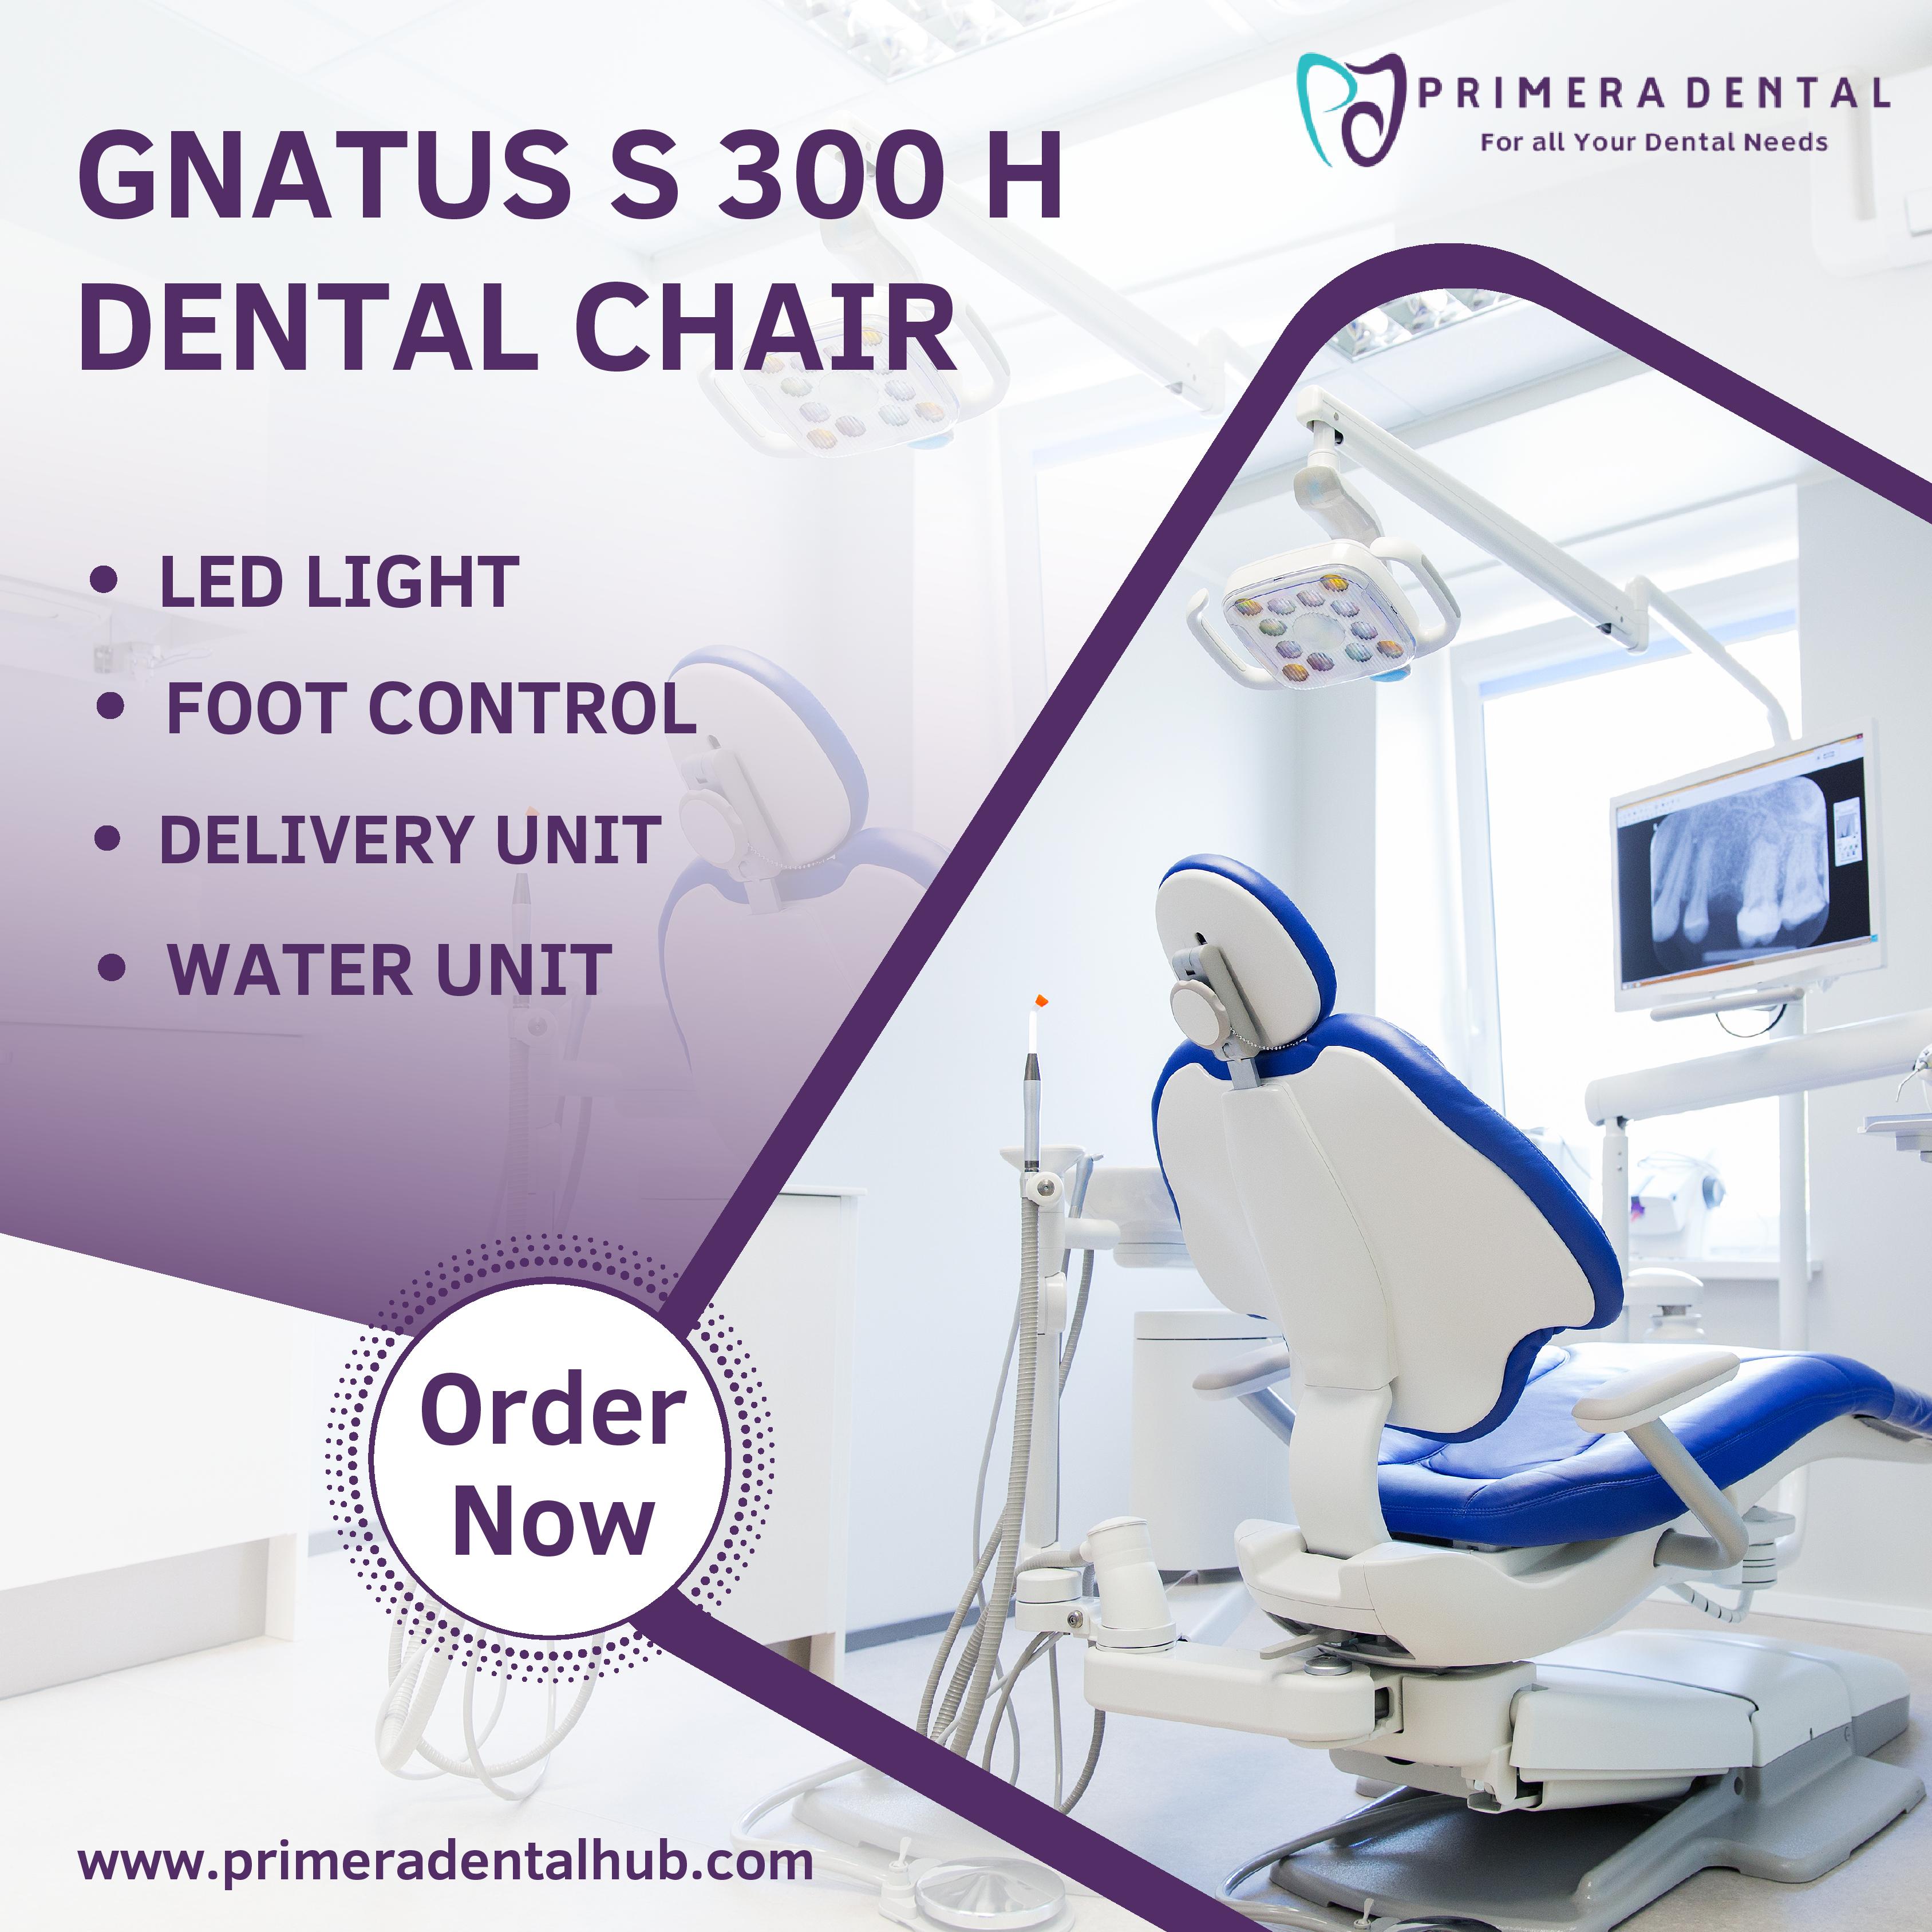 Primera Dental Hub - Buy dental products online at the cheapest ratesHealth and BeautyClinicsAll IndiaBus Stations